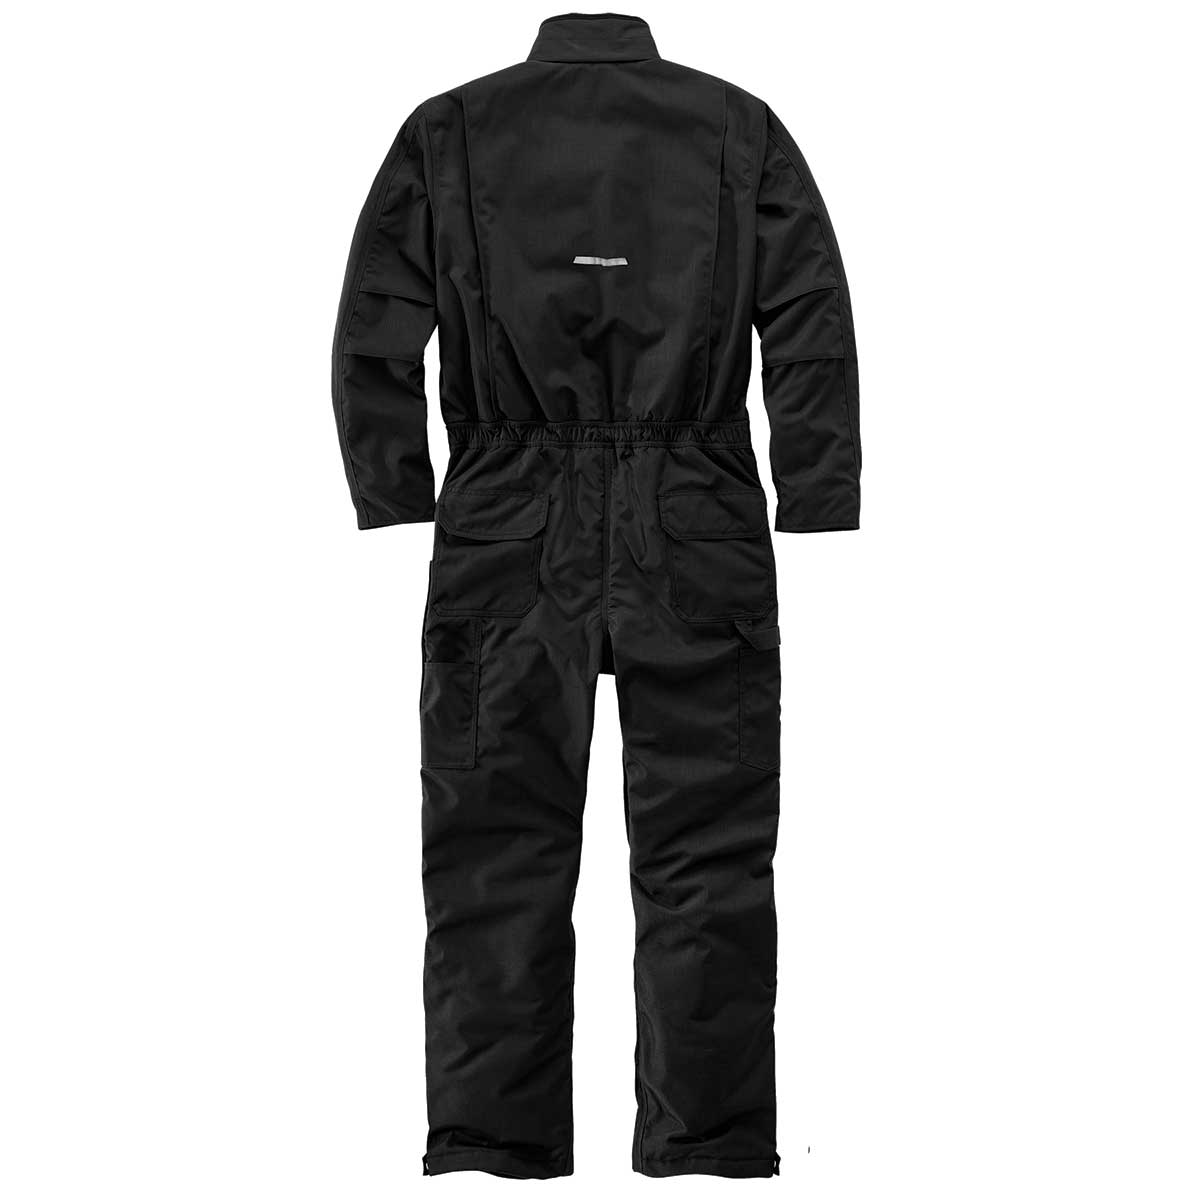 Carhartt Yukon Extremes Insulated Coverall